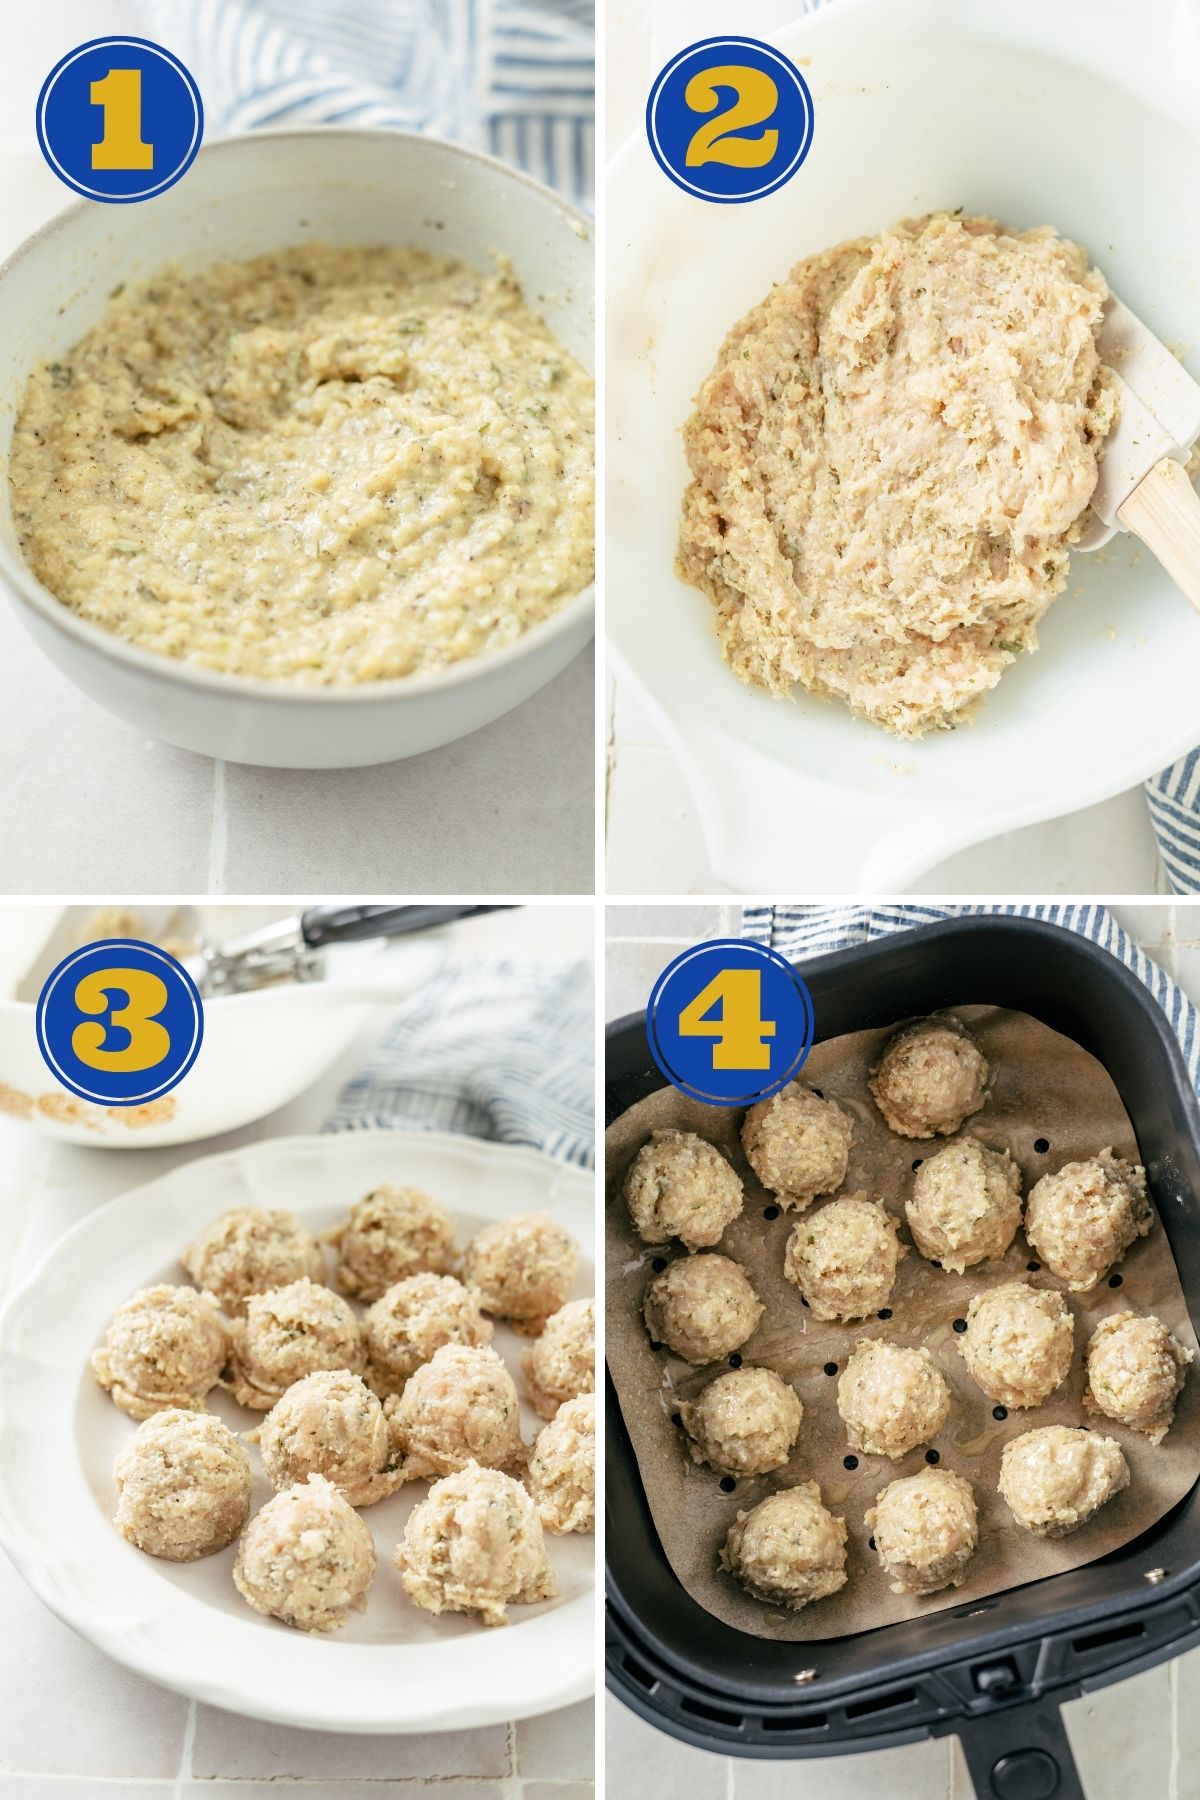 Step-by-step guide to crafting delicious air fryer chicken meatballs